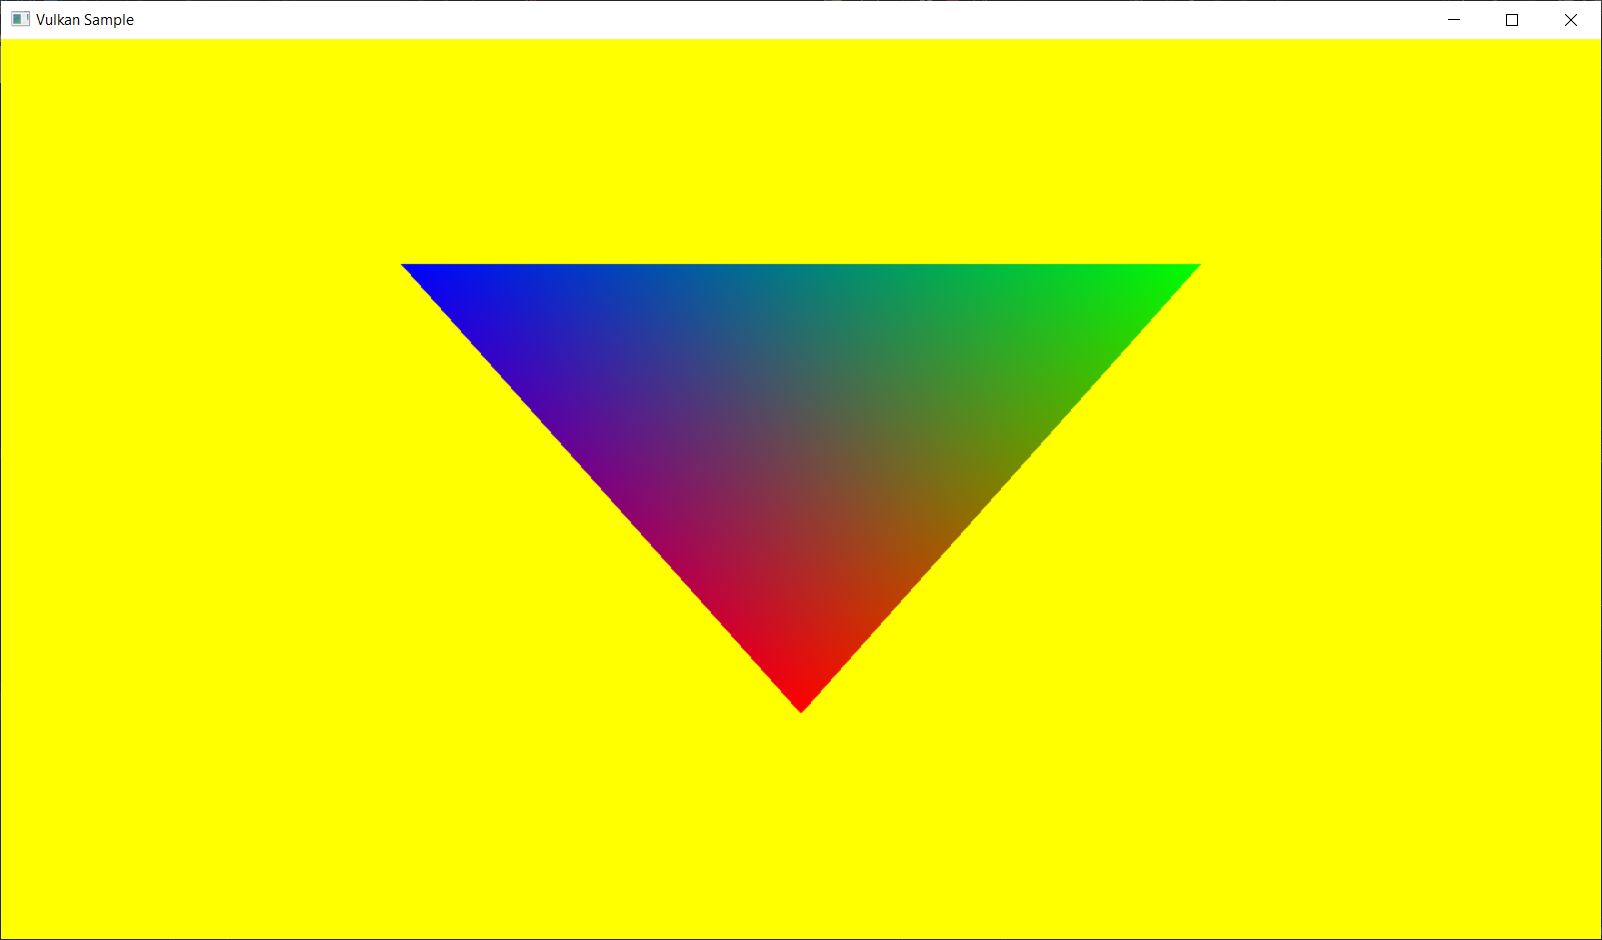 Image of the Triangle sample